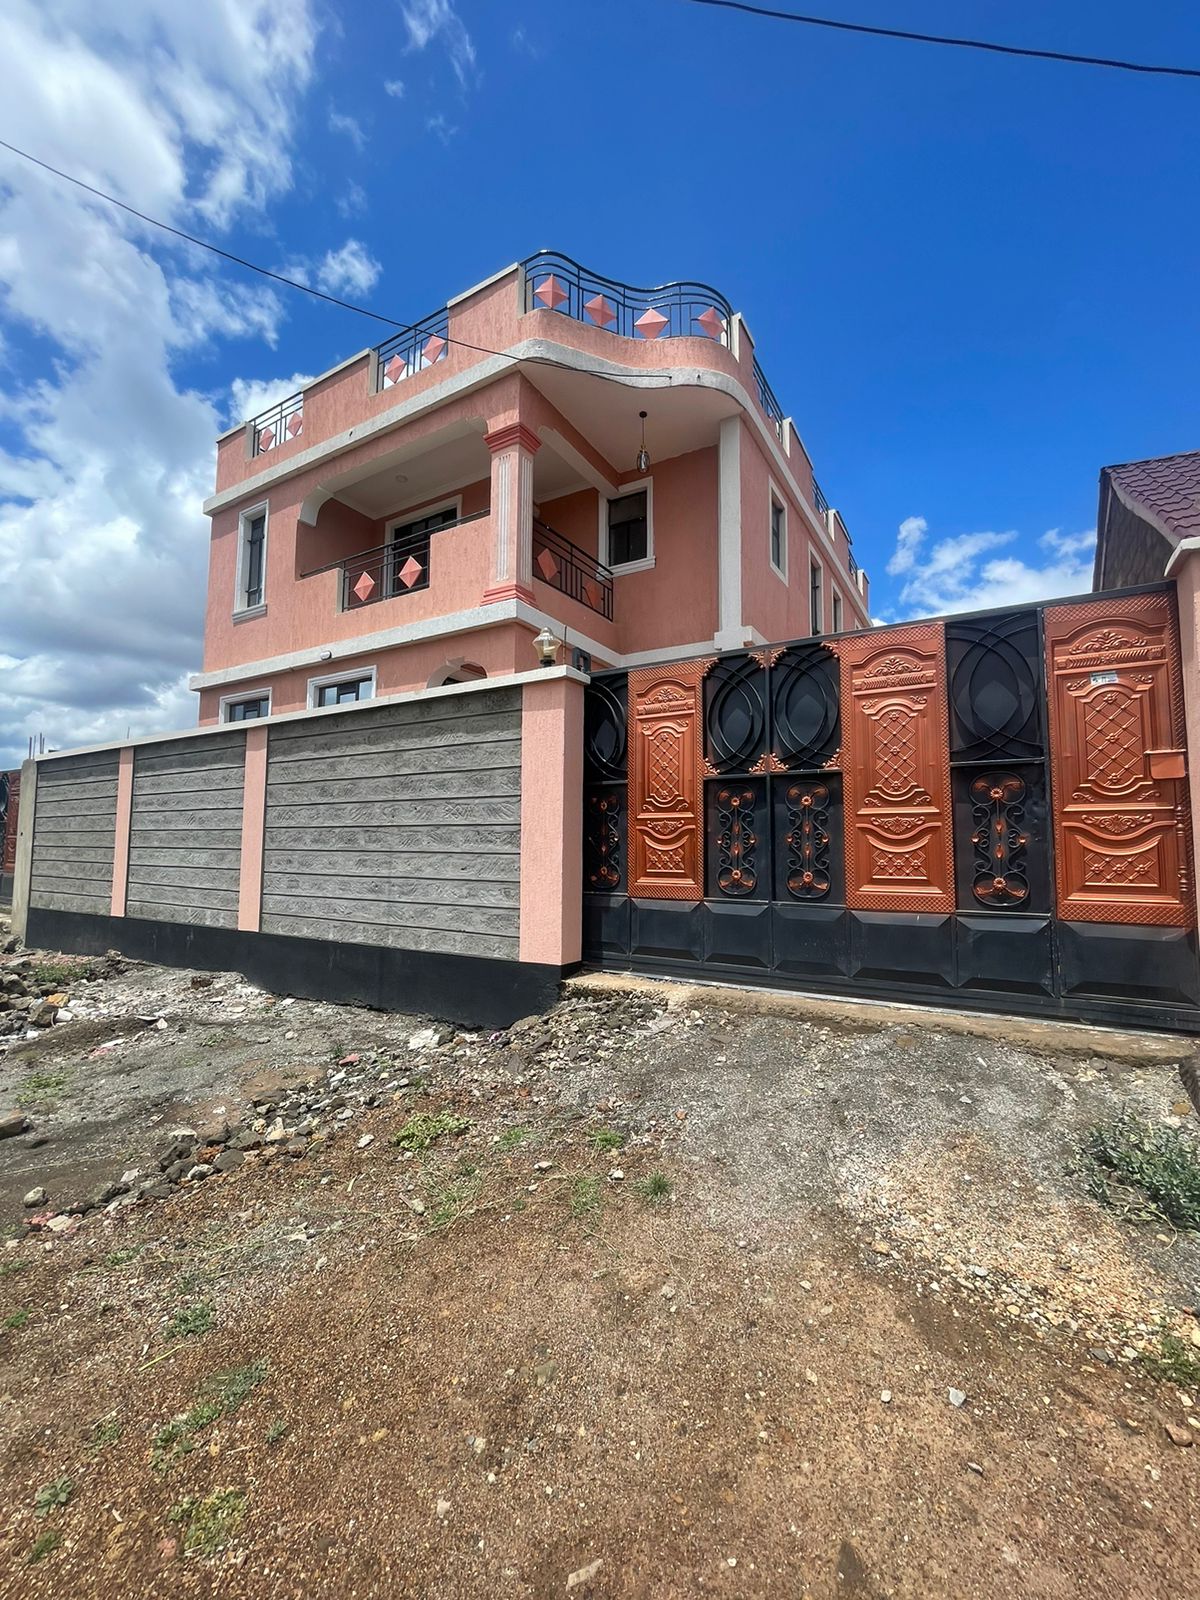 4 bedroom Maisonette for sale Ruiru at 12.5M. All bedrooms are en-suite. Spacious living room Dining area Semi-open kitchen Musilli Homes Pam Golding